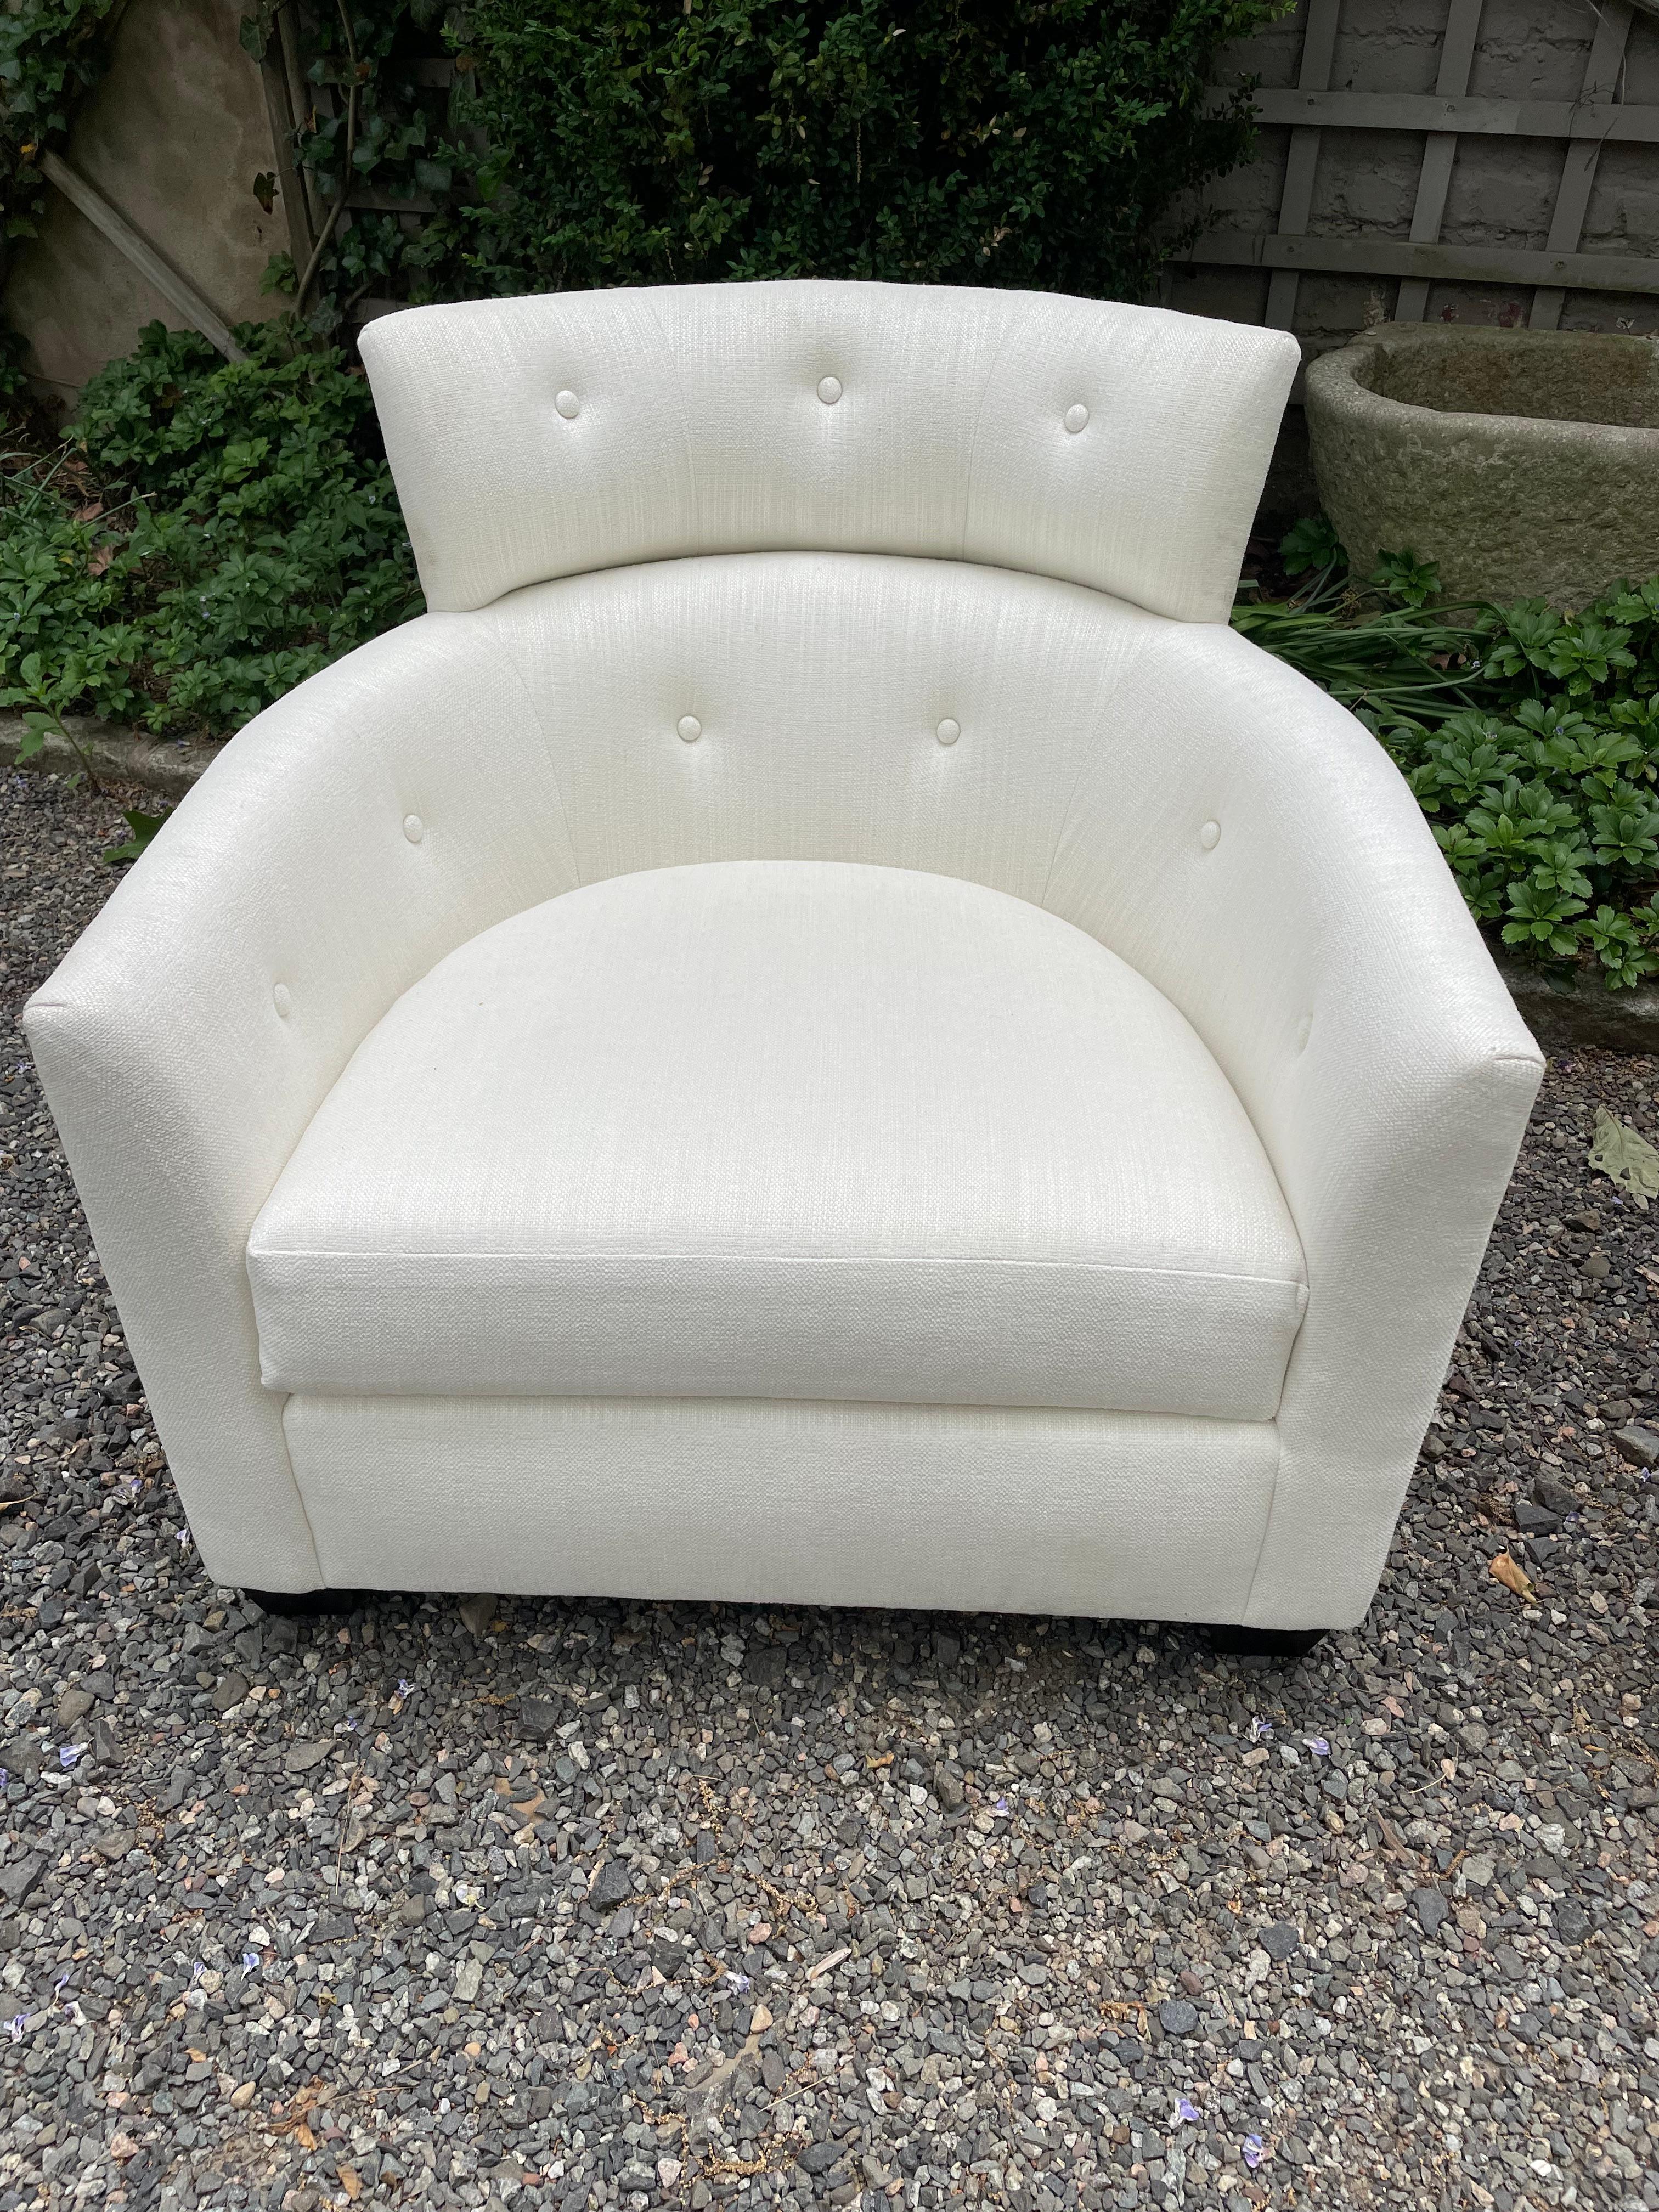 Super chic glamorous pair of barrel back curvy white club chairs upholstered in a cotton blend textured fabric. Very comfortable and stylish.